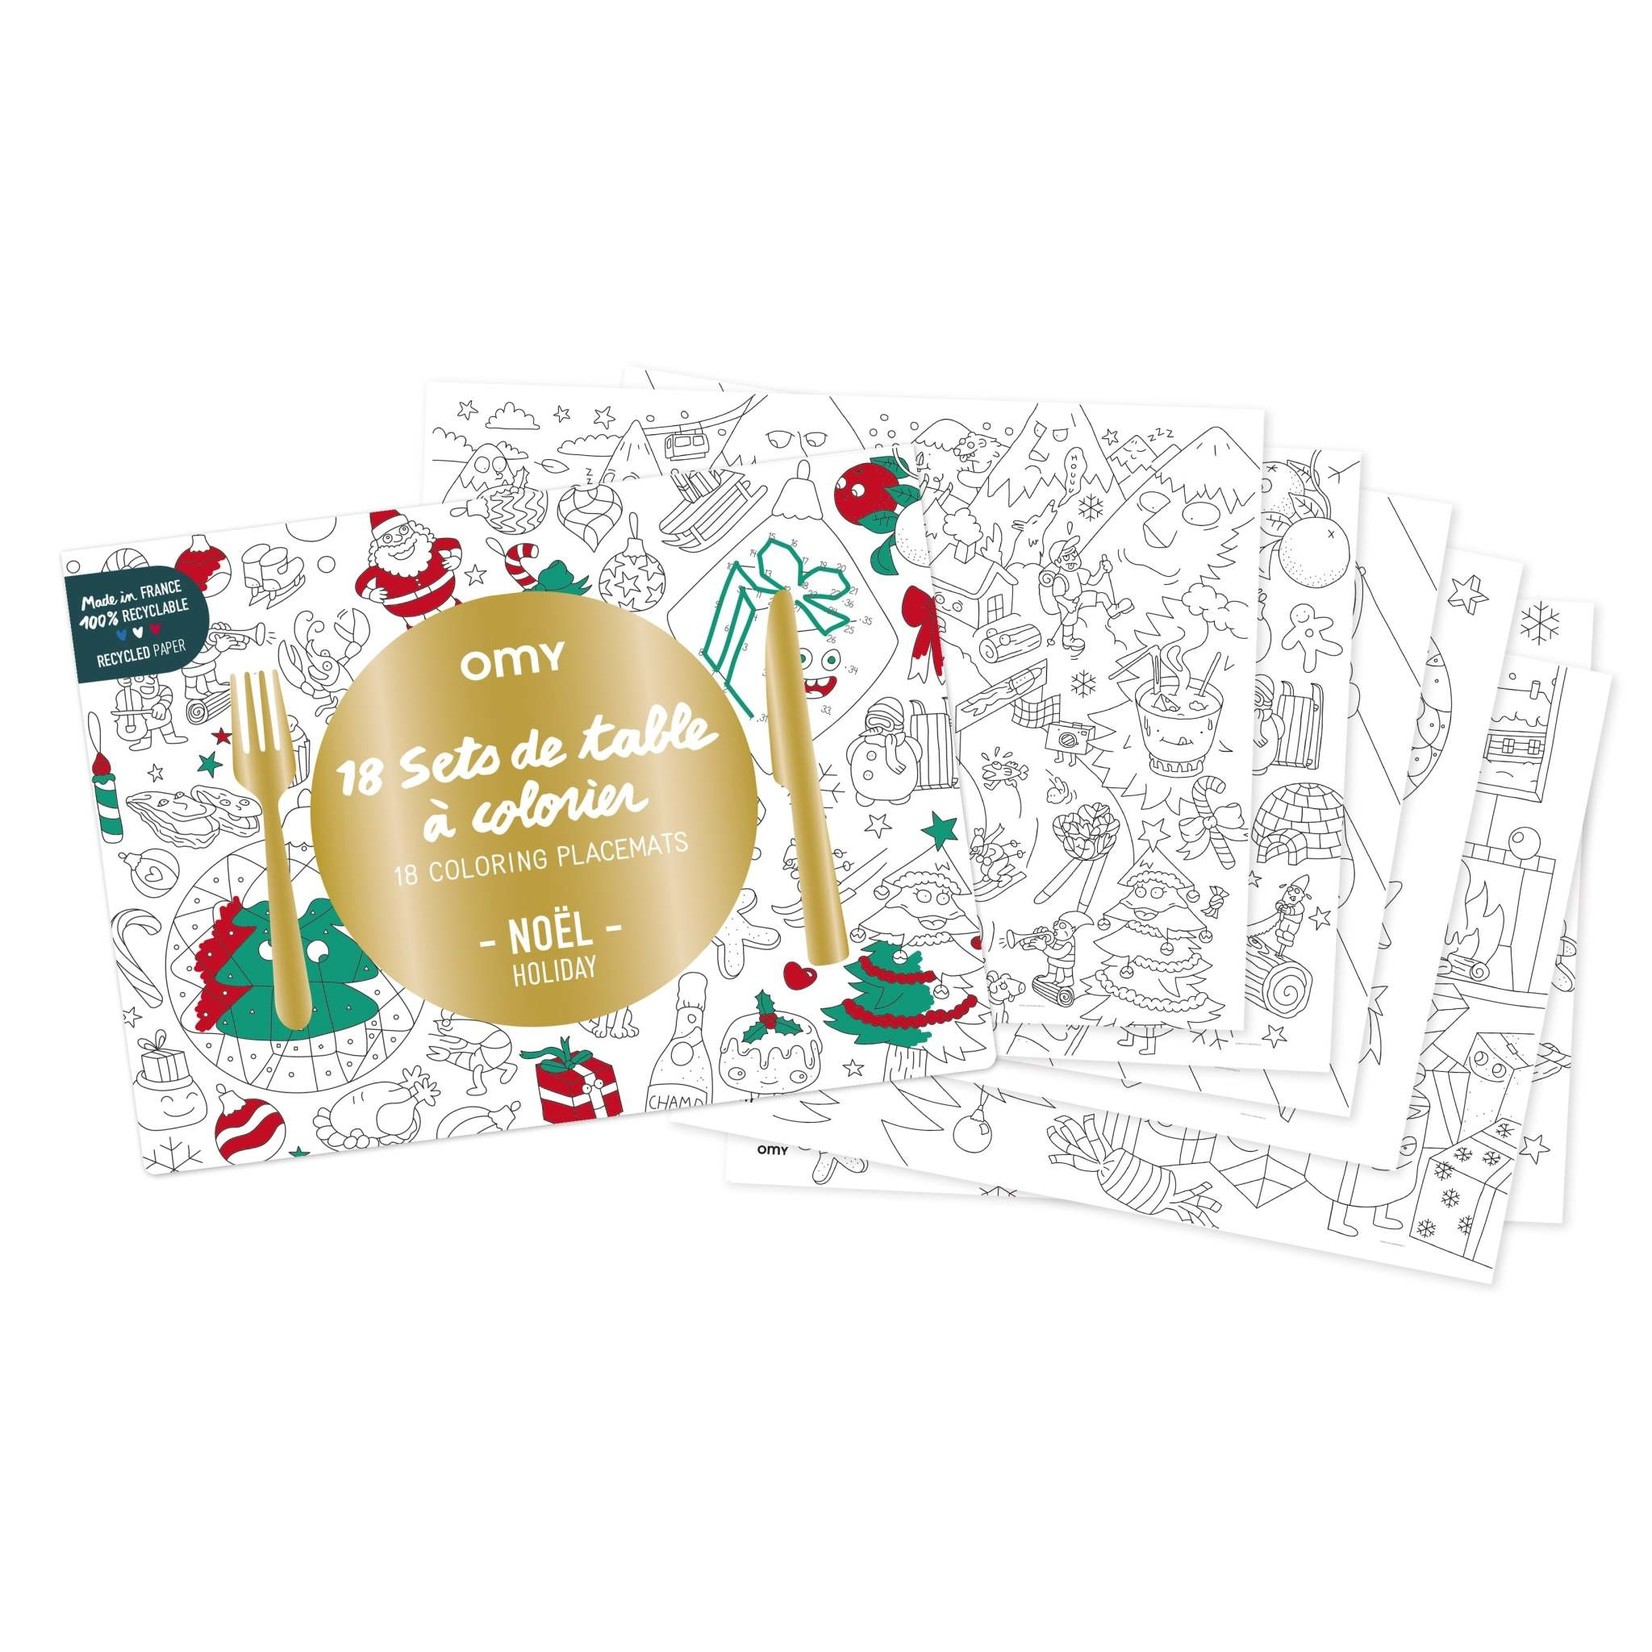 Omy Omy | Holiday Coloring Placemats